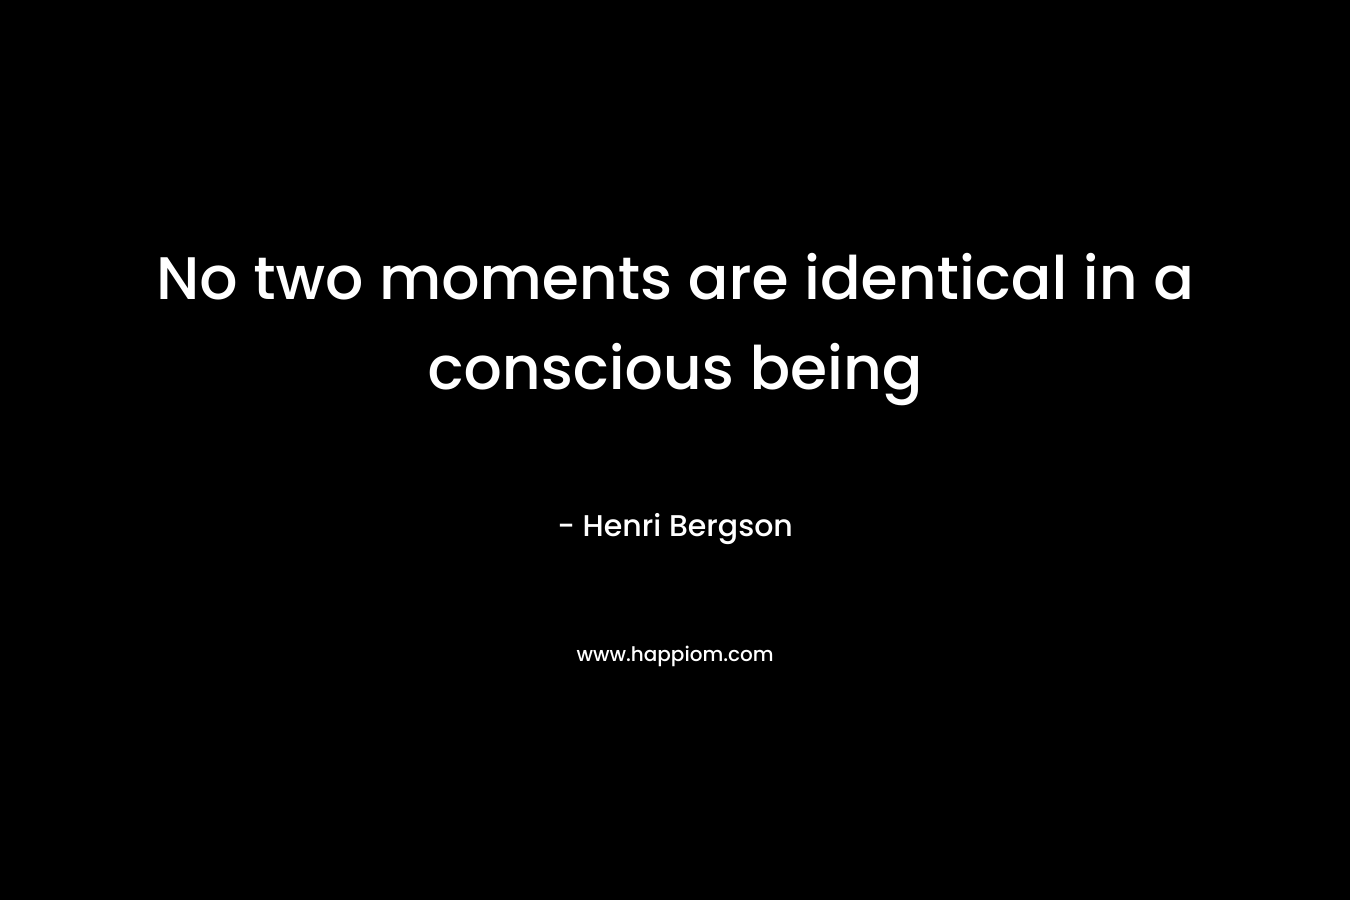 No two moments are identical in a conscious being